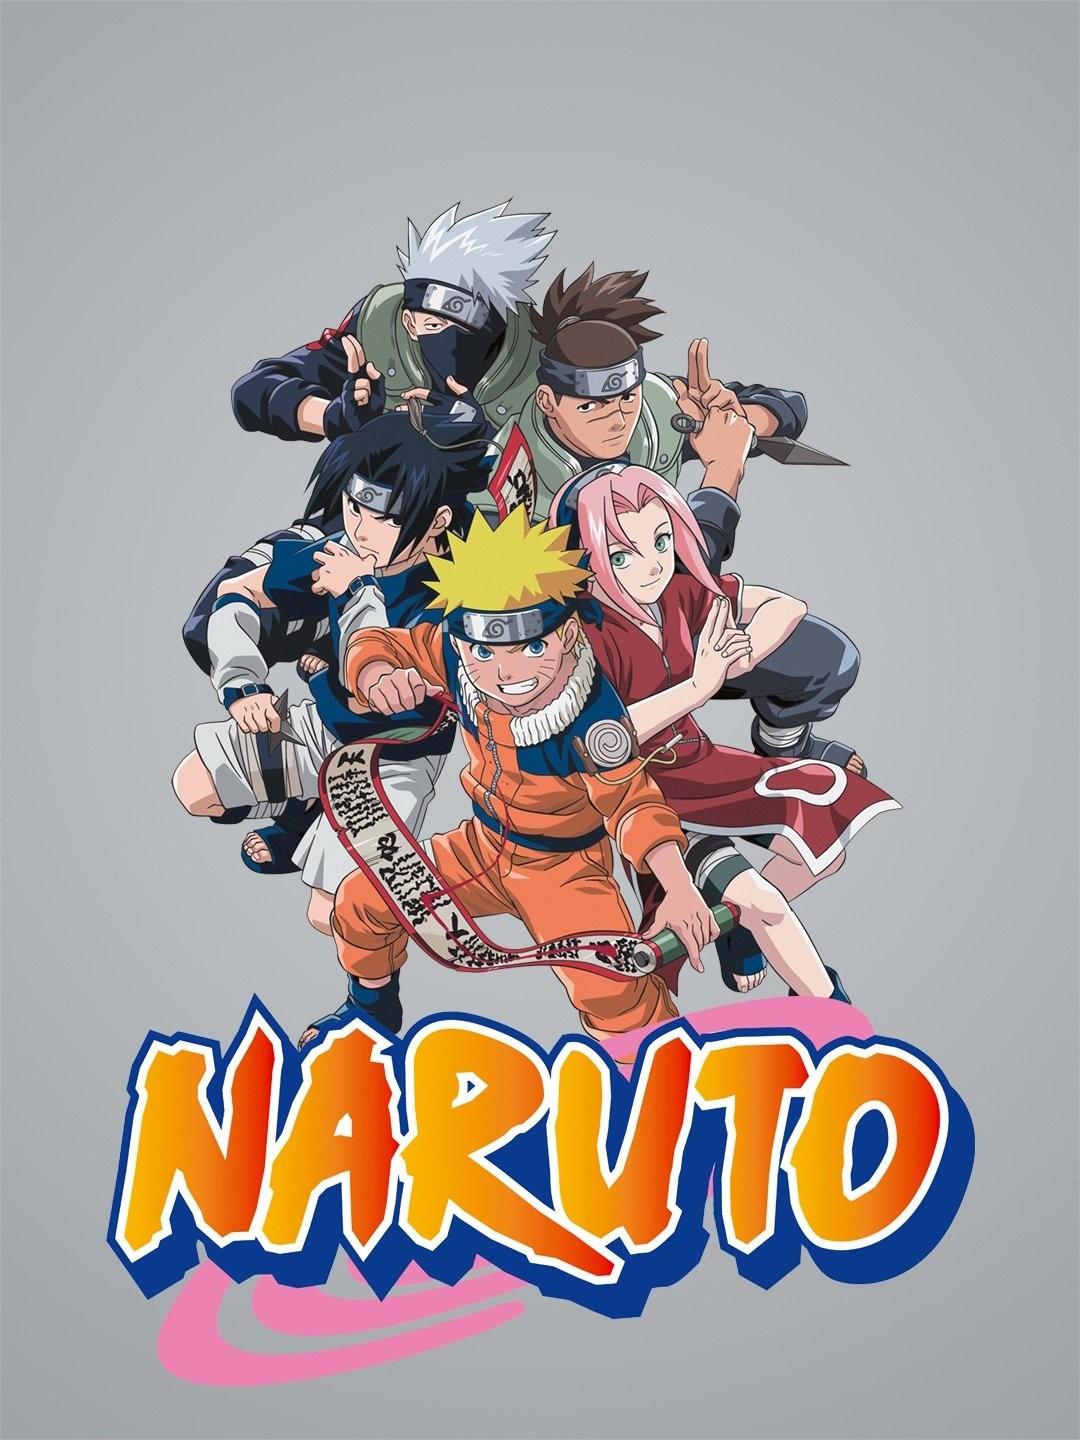 Naruto Wallpapers - Top 75 Best Naruto Wallpapers [ HQ ]